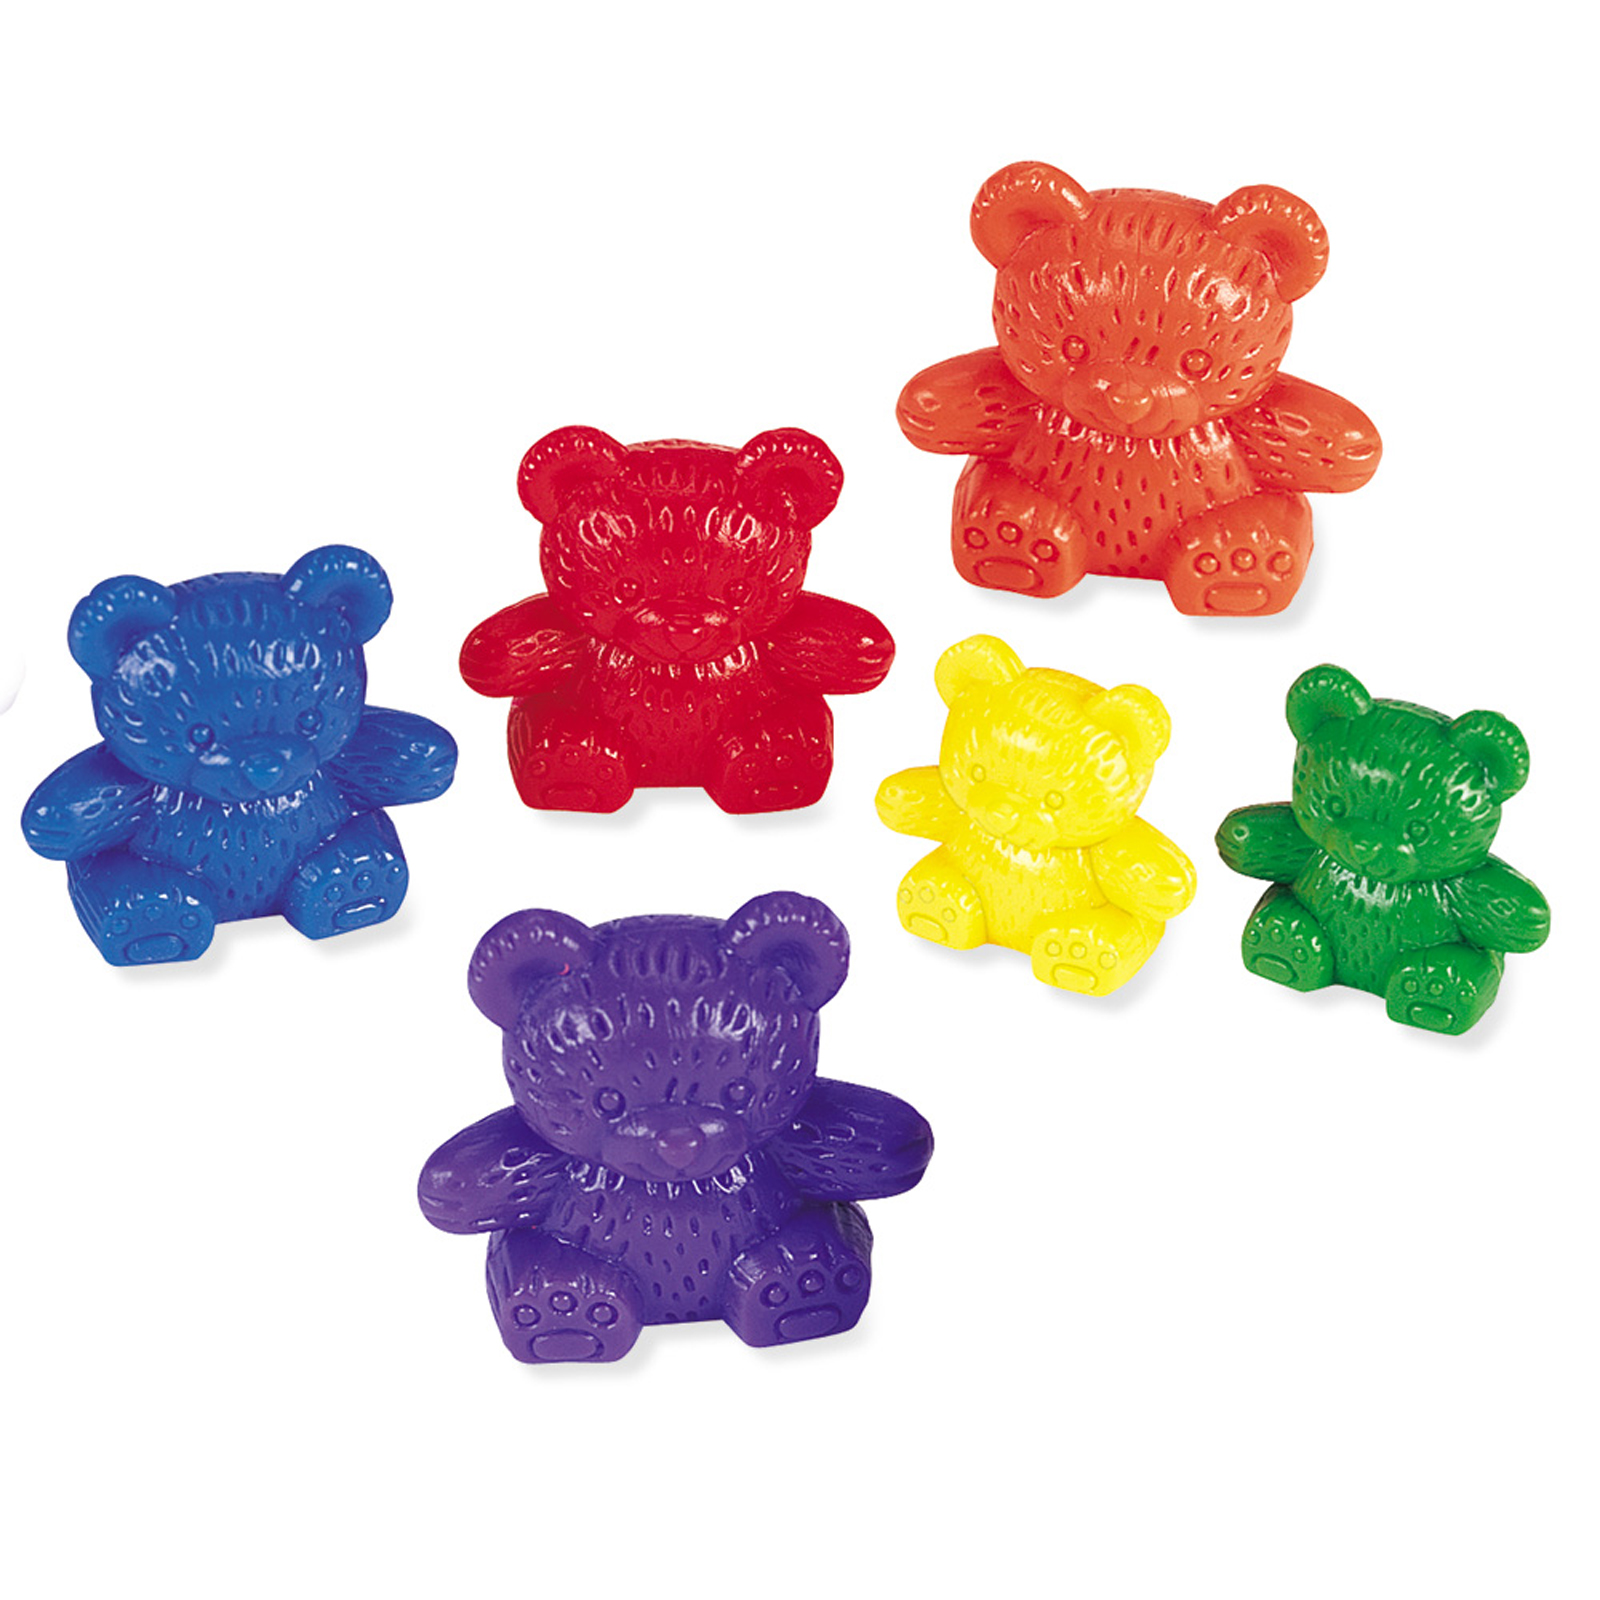 Learning Resources Three Bear Family Rainbow Counters, Set of 96 image number null